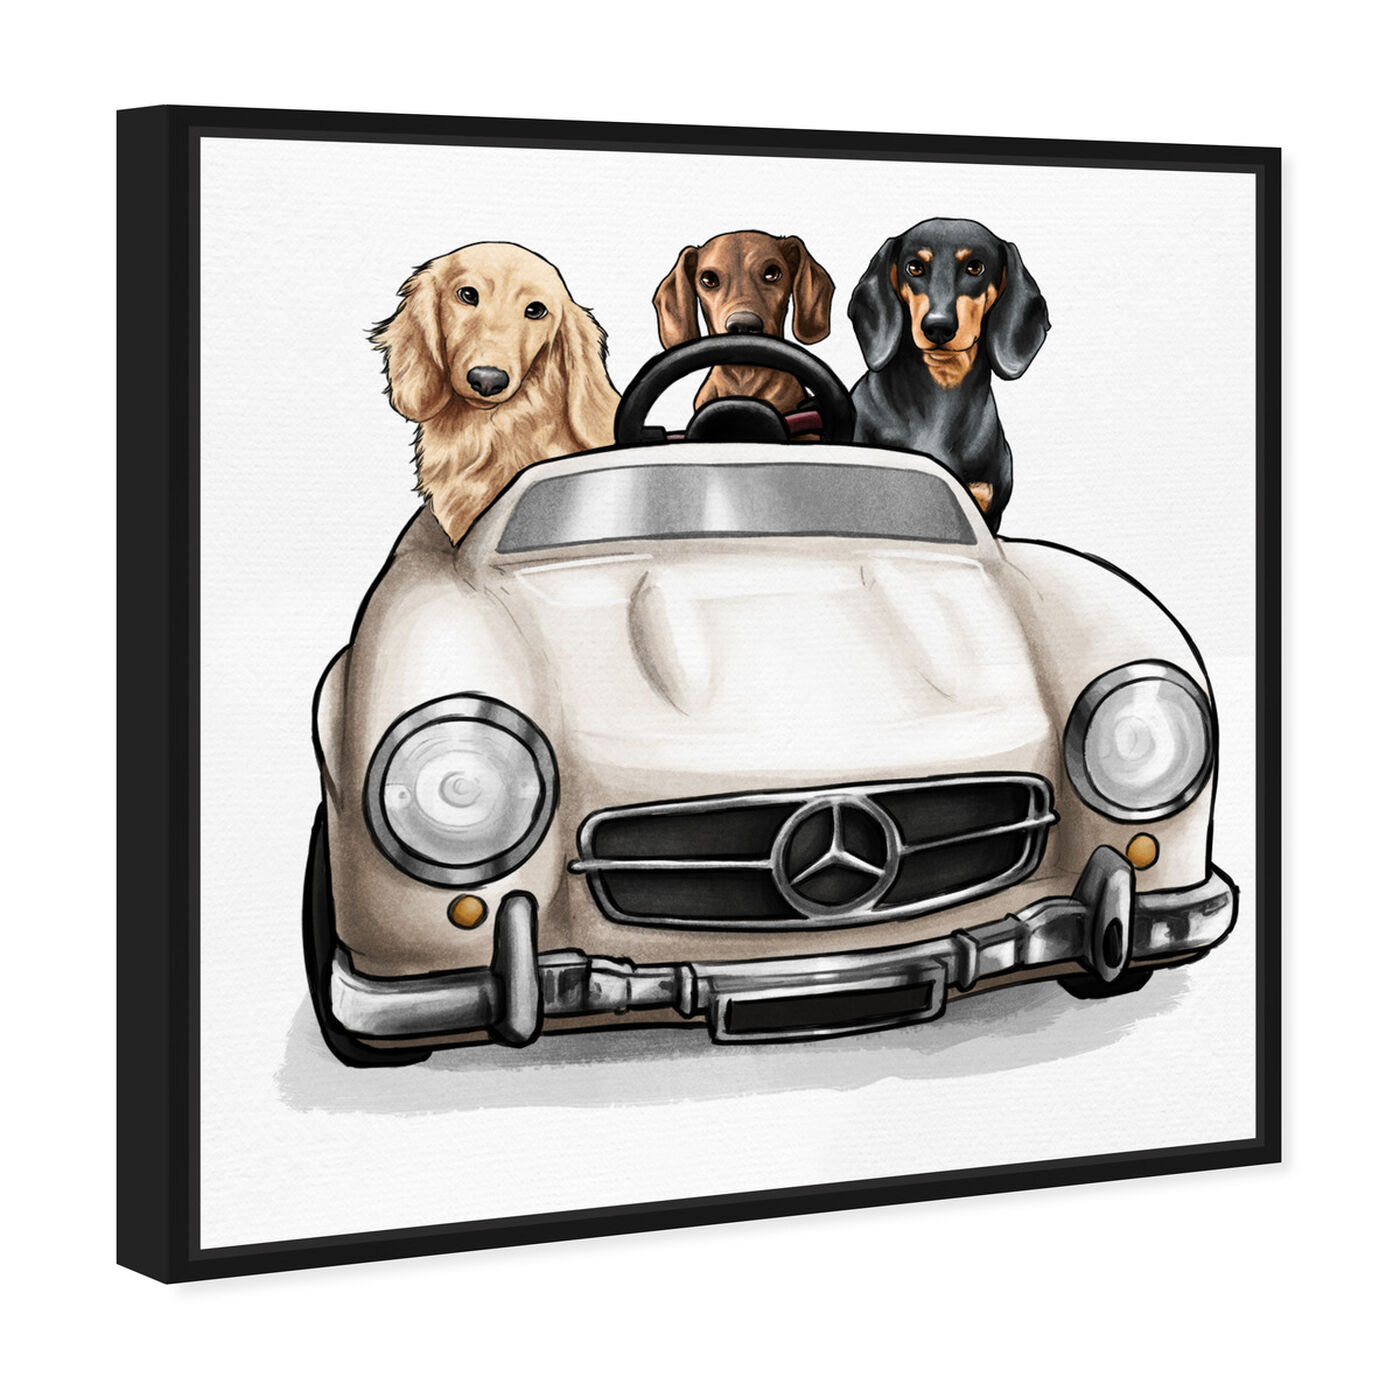 Angled view of Strolling in Style dachshunds featuring animals and dogs and puppies art.